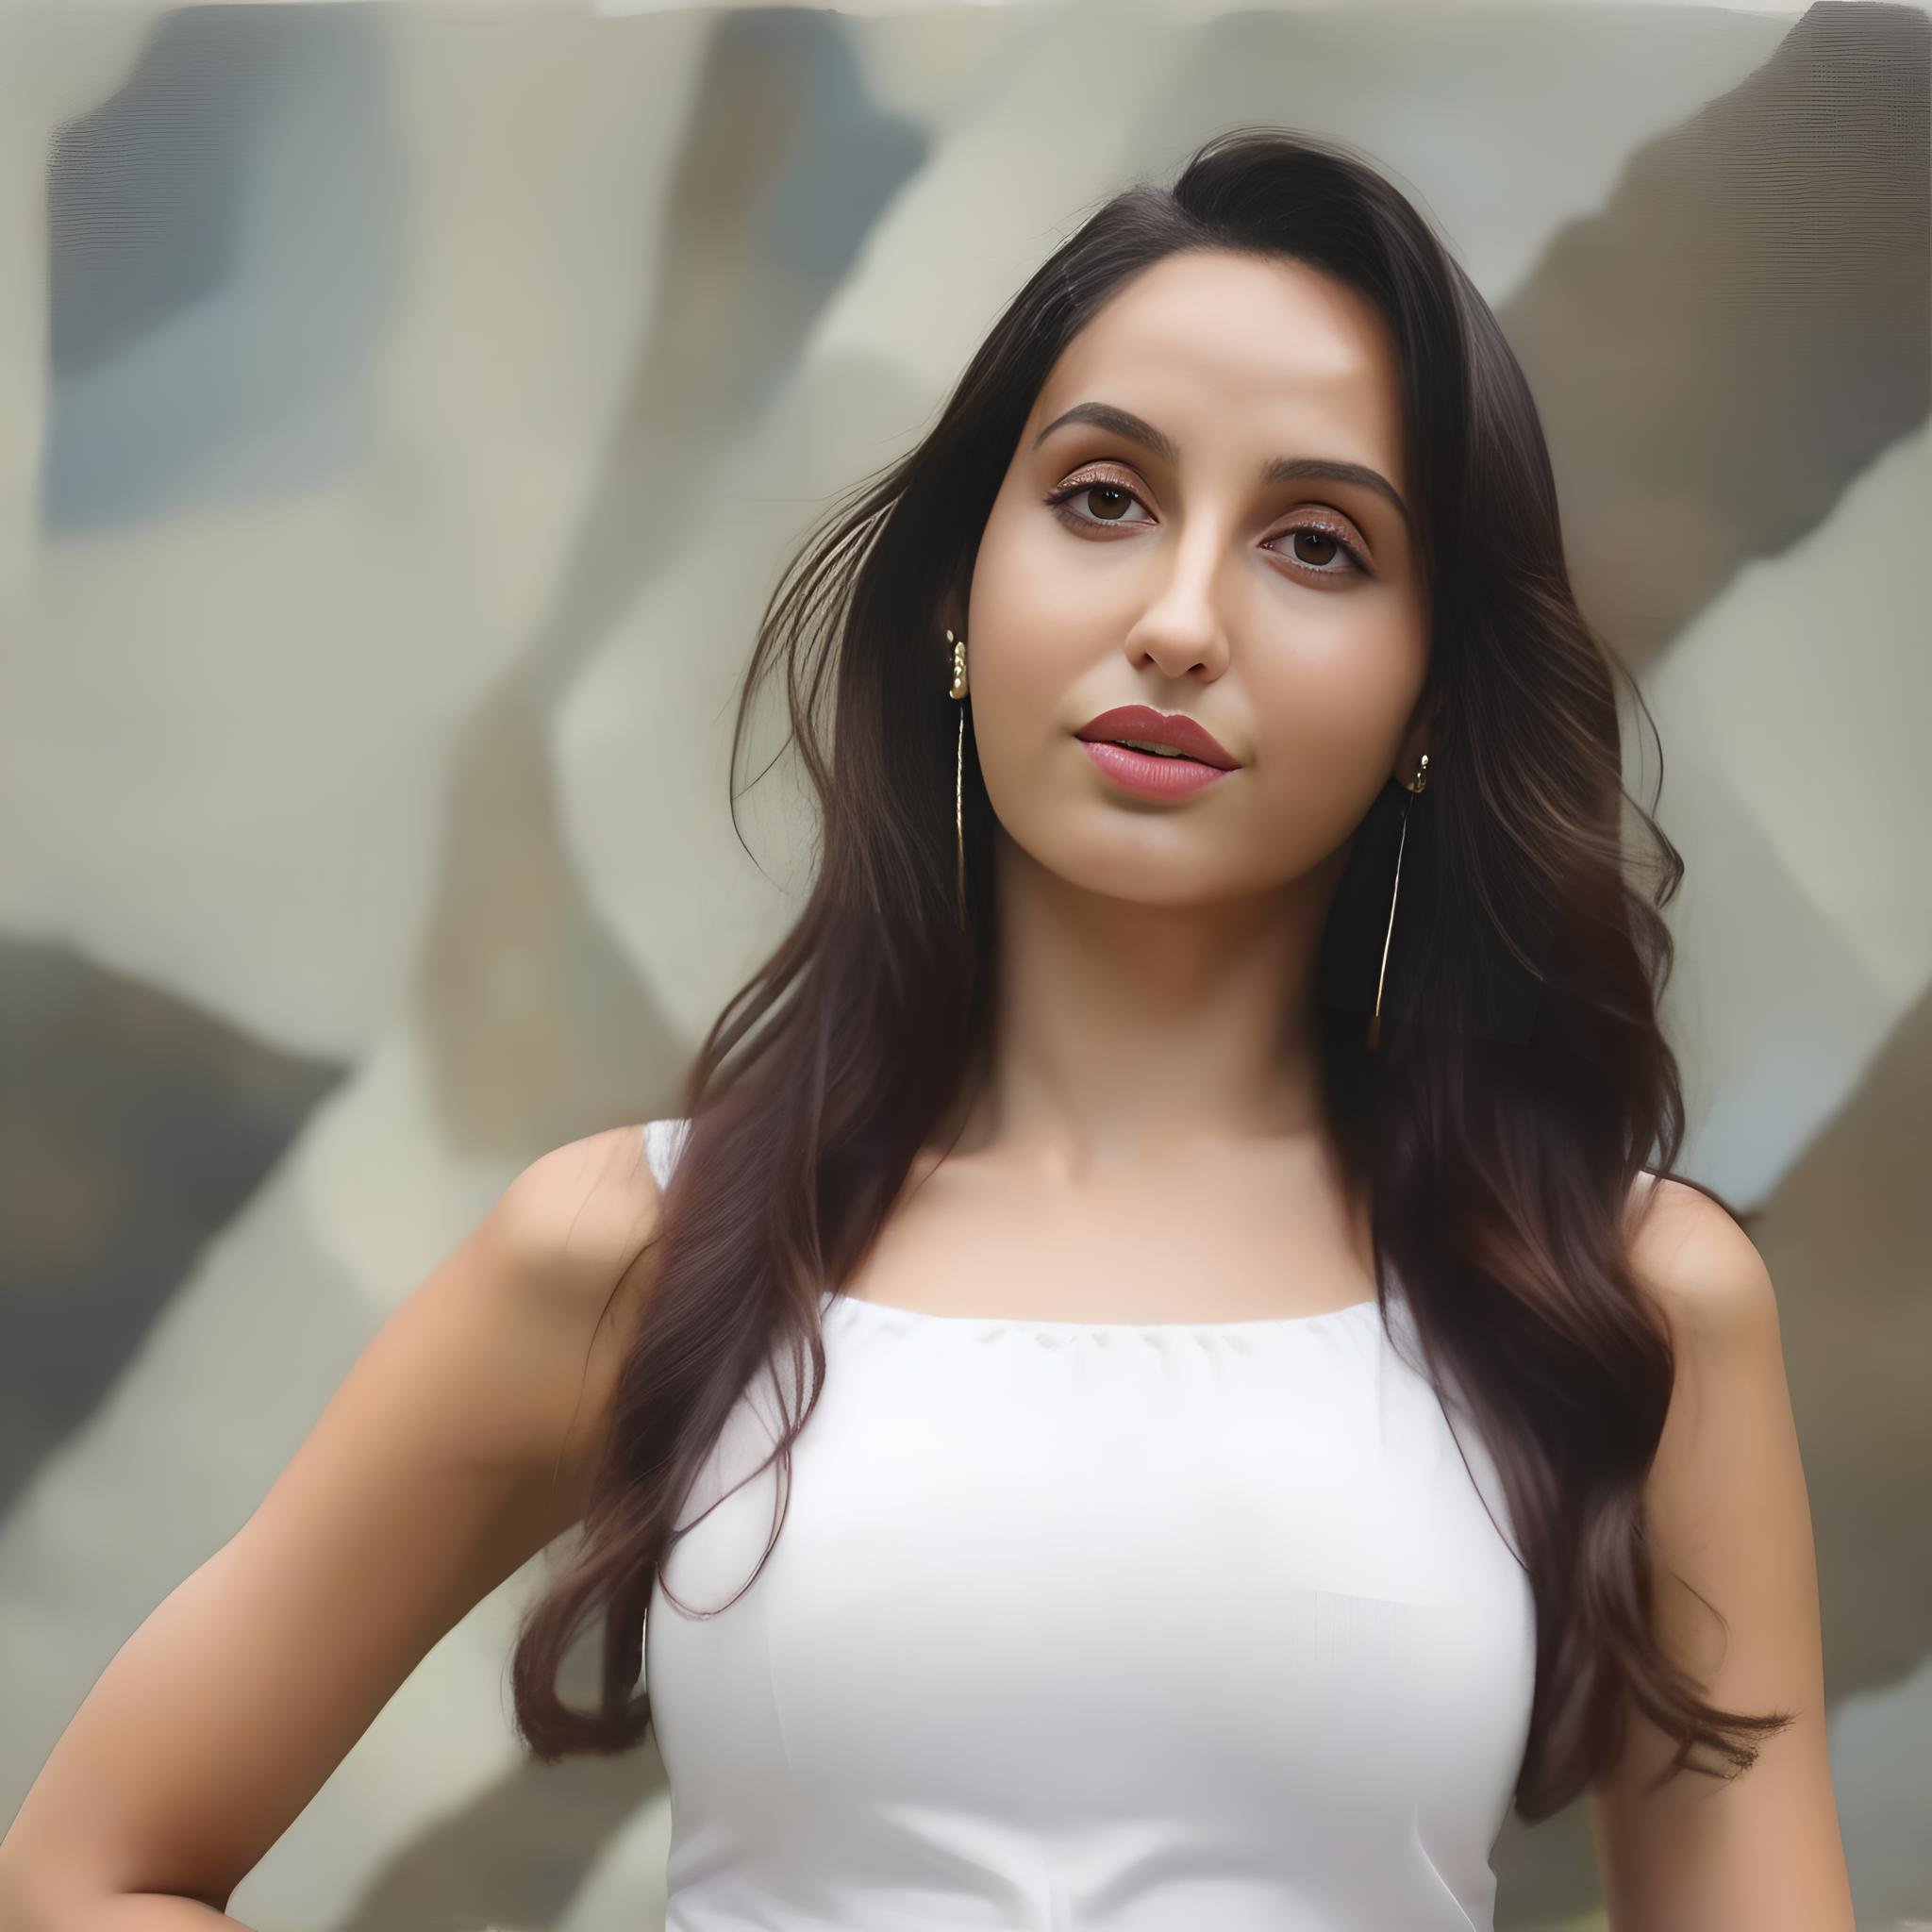 NoraFatehi, art by Gary Hume, photograph, Aesthetically Pleasing Girl, background is [Synagogue|Cliff], Hazy conditions, Energetic, Crystal Cubism, film grain, Fujifilm XT3, telephoto lens,  <lora:NoraFatehiSDXL:1>